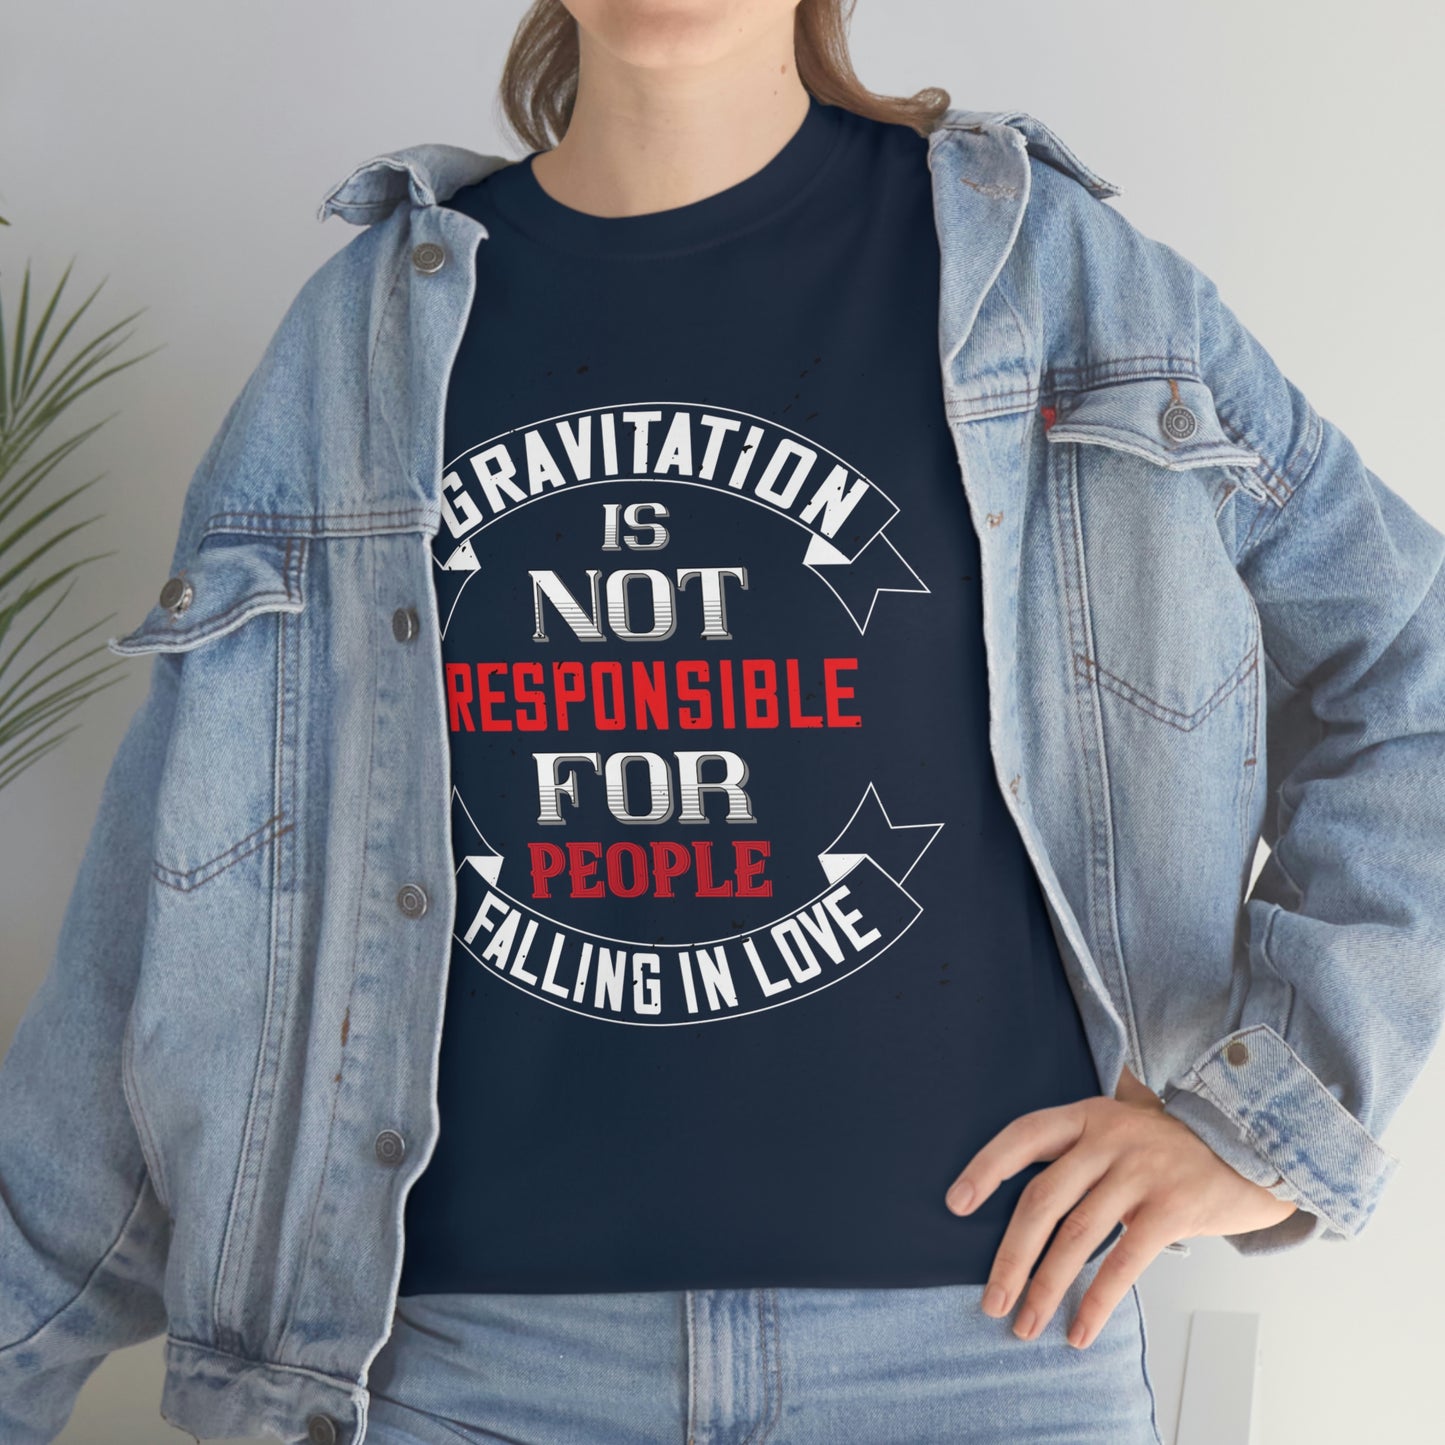 Gravitation is not Responsible Cotton Tee